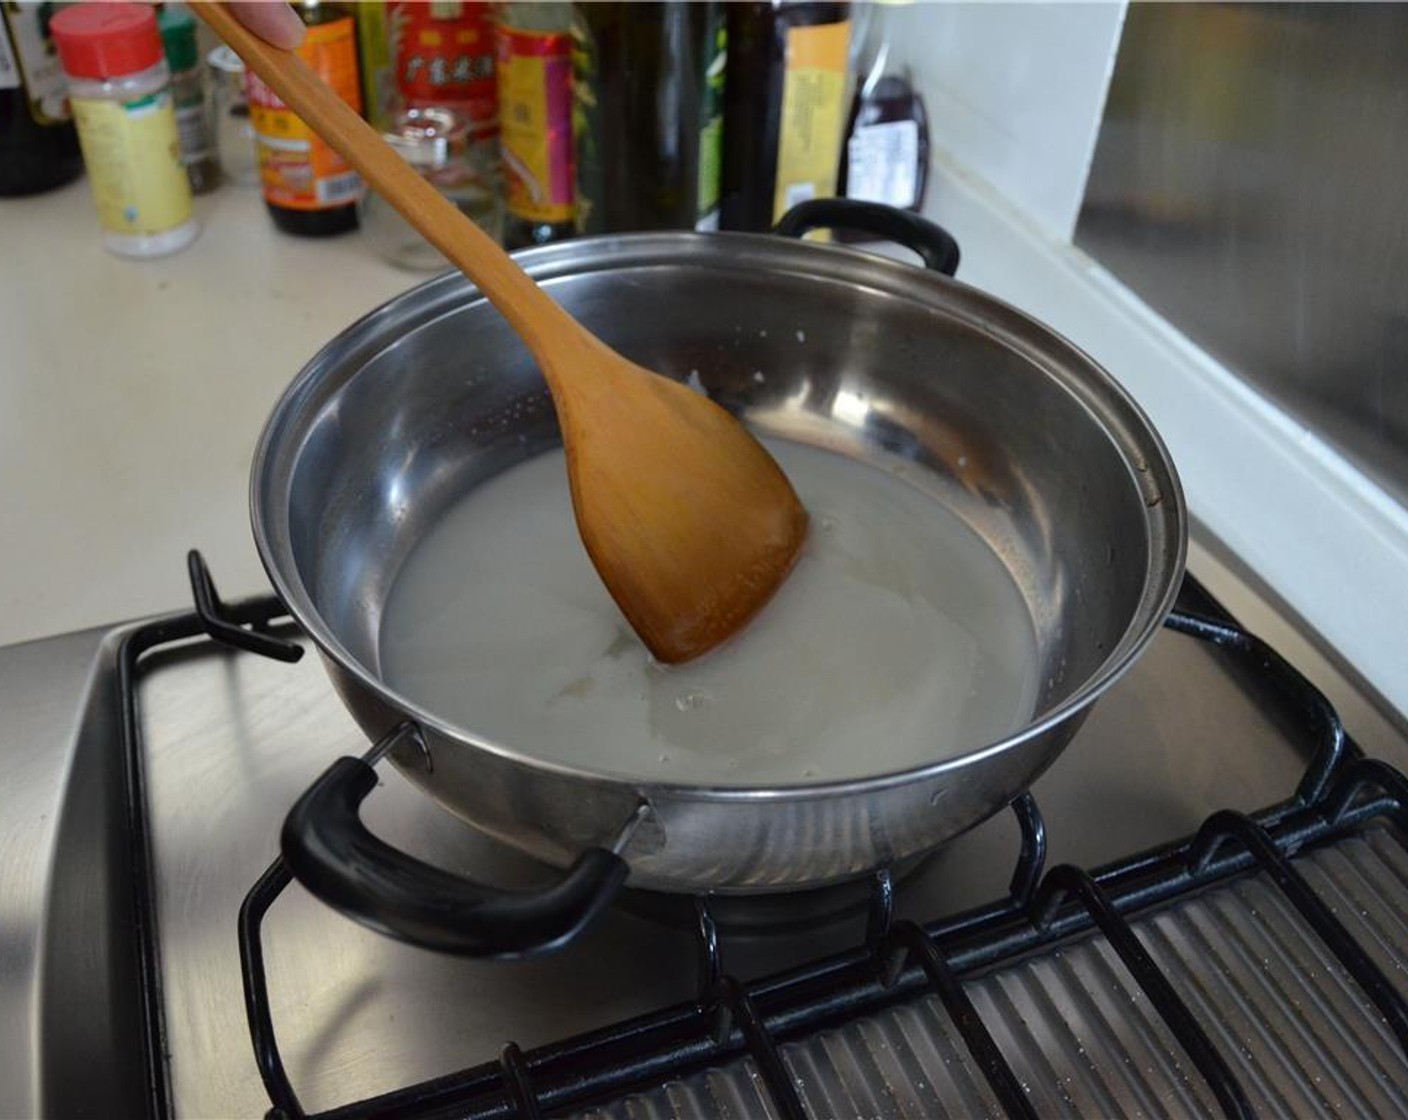 step 1 In a pan, bring Milk (1/4 cup) and white Granulated Sugar (2 cups) to a boil. Boil for about 2 minutes, stirring often.